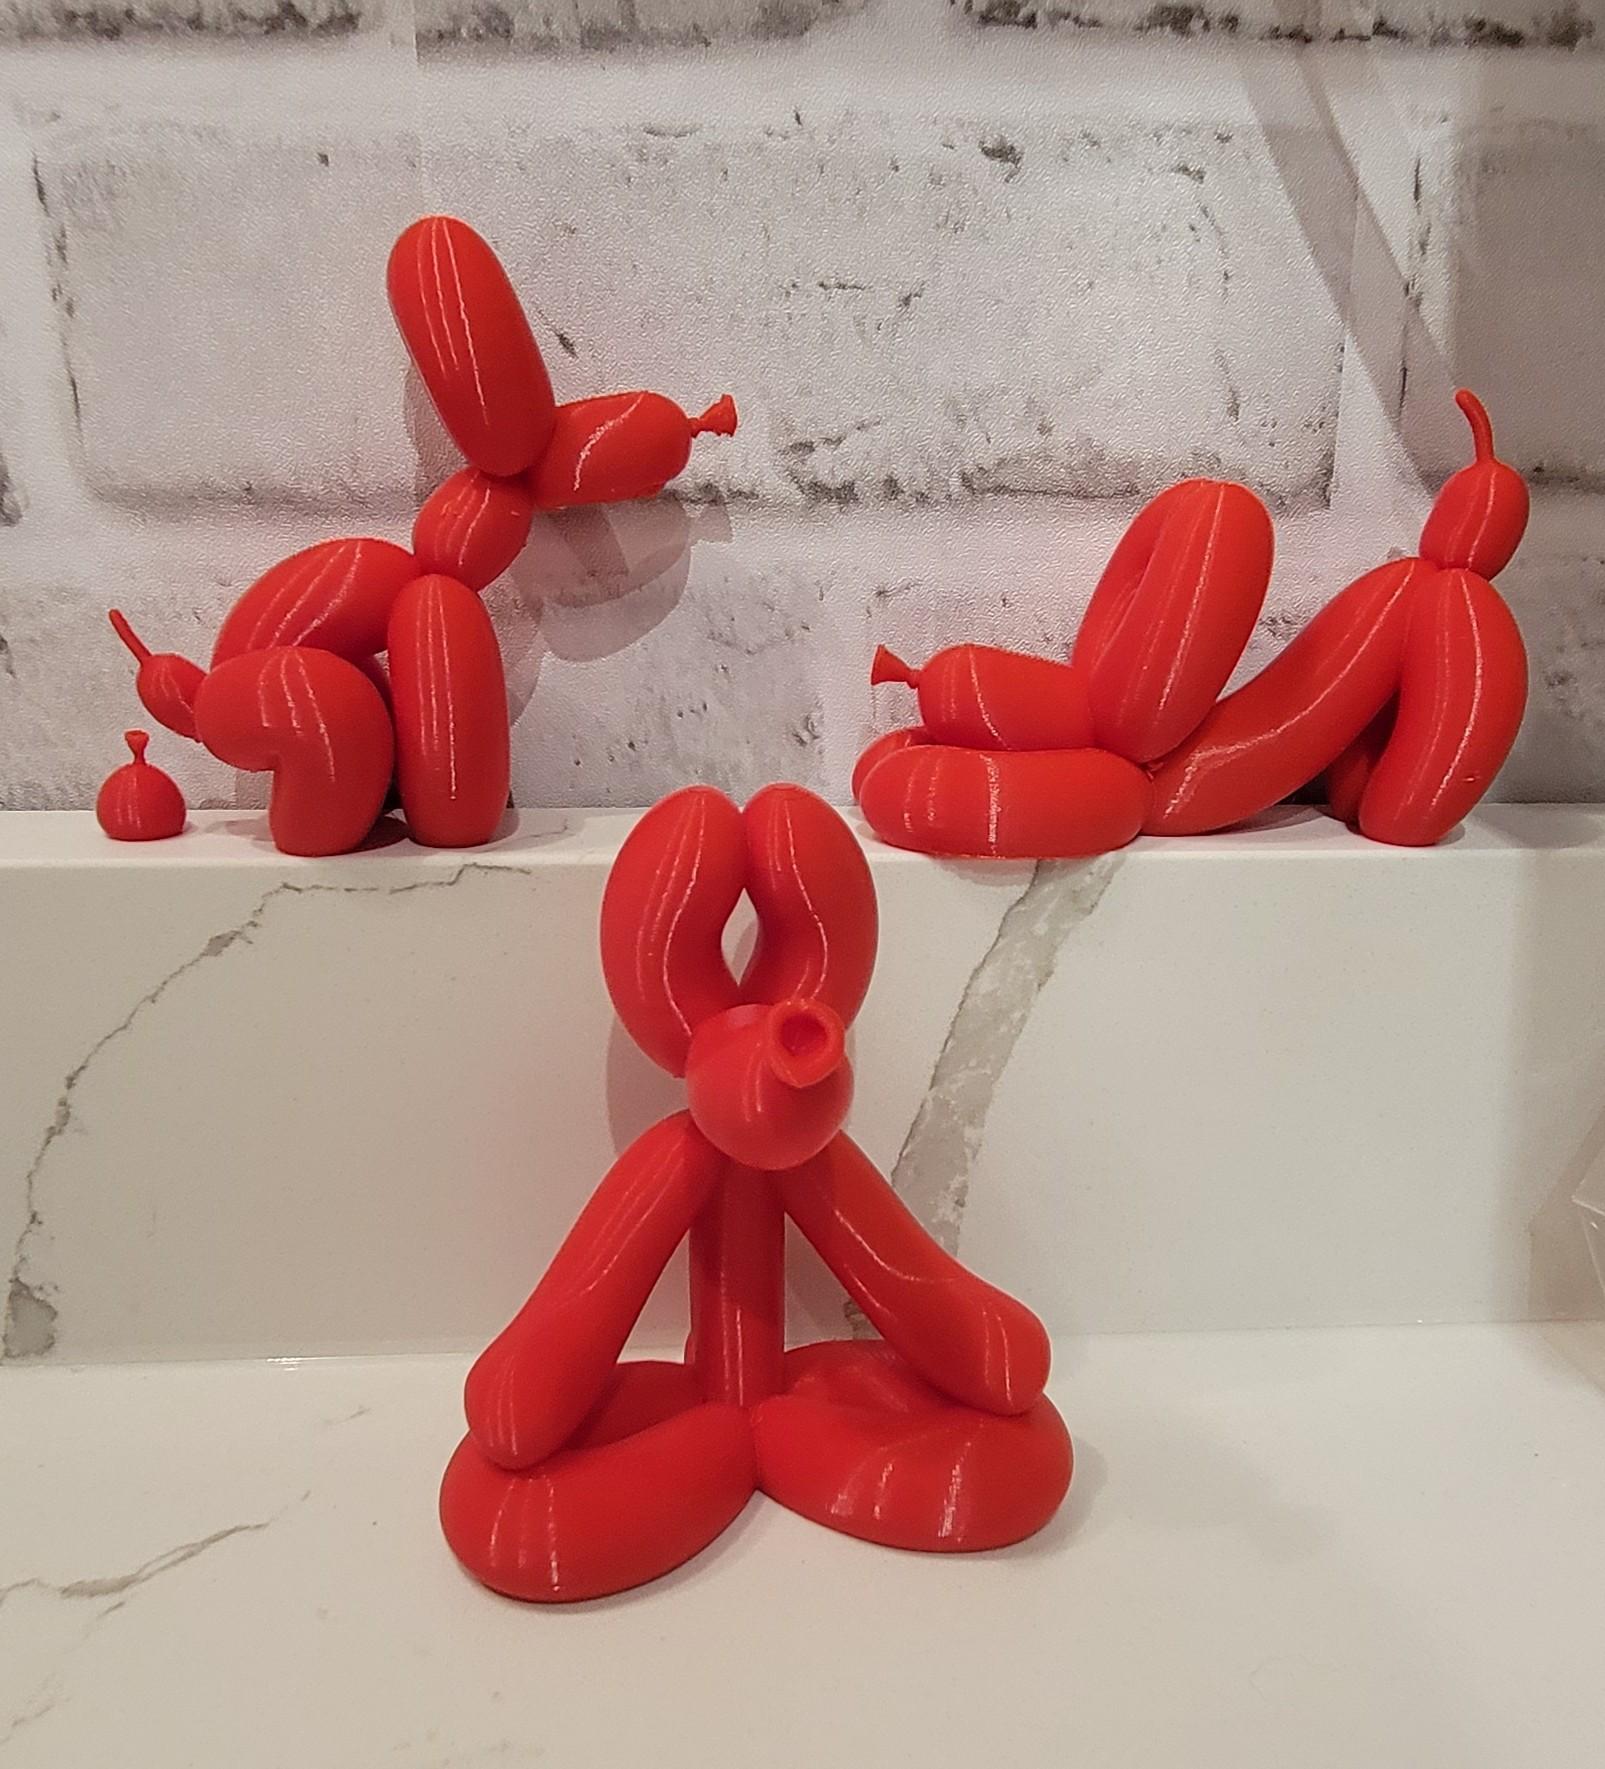 Balloon Doggy Yoga -Downward Dog - Love this series!  - 3d model